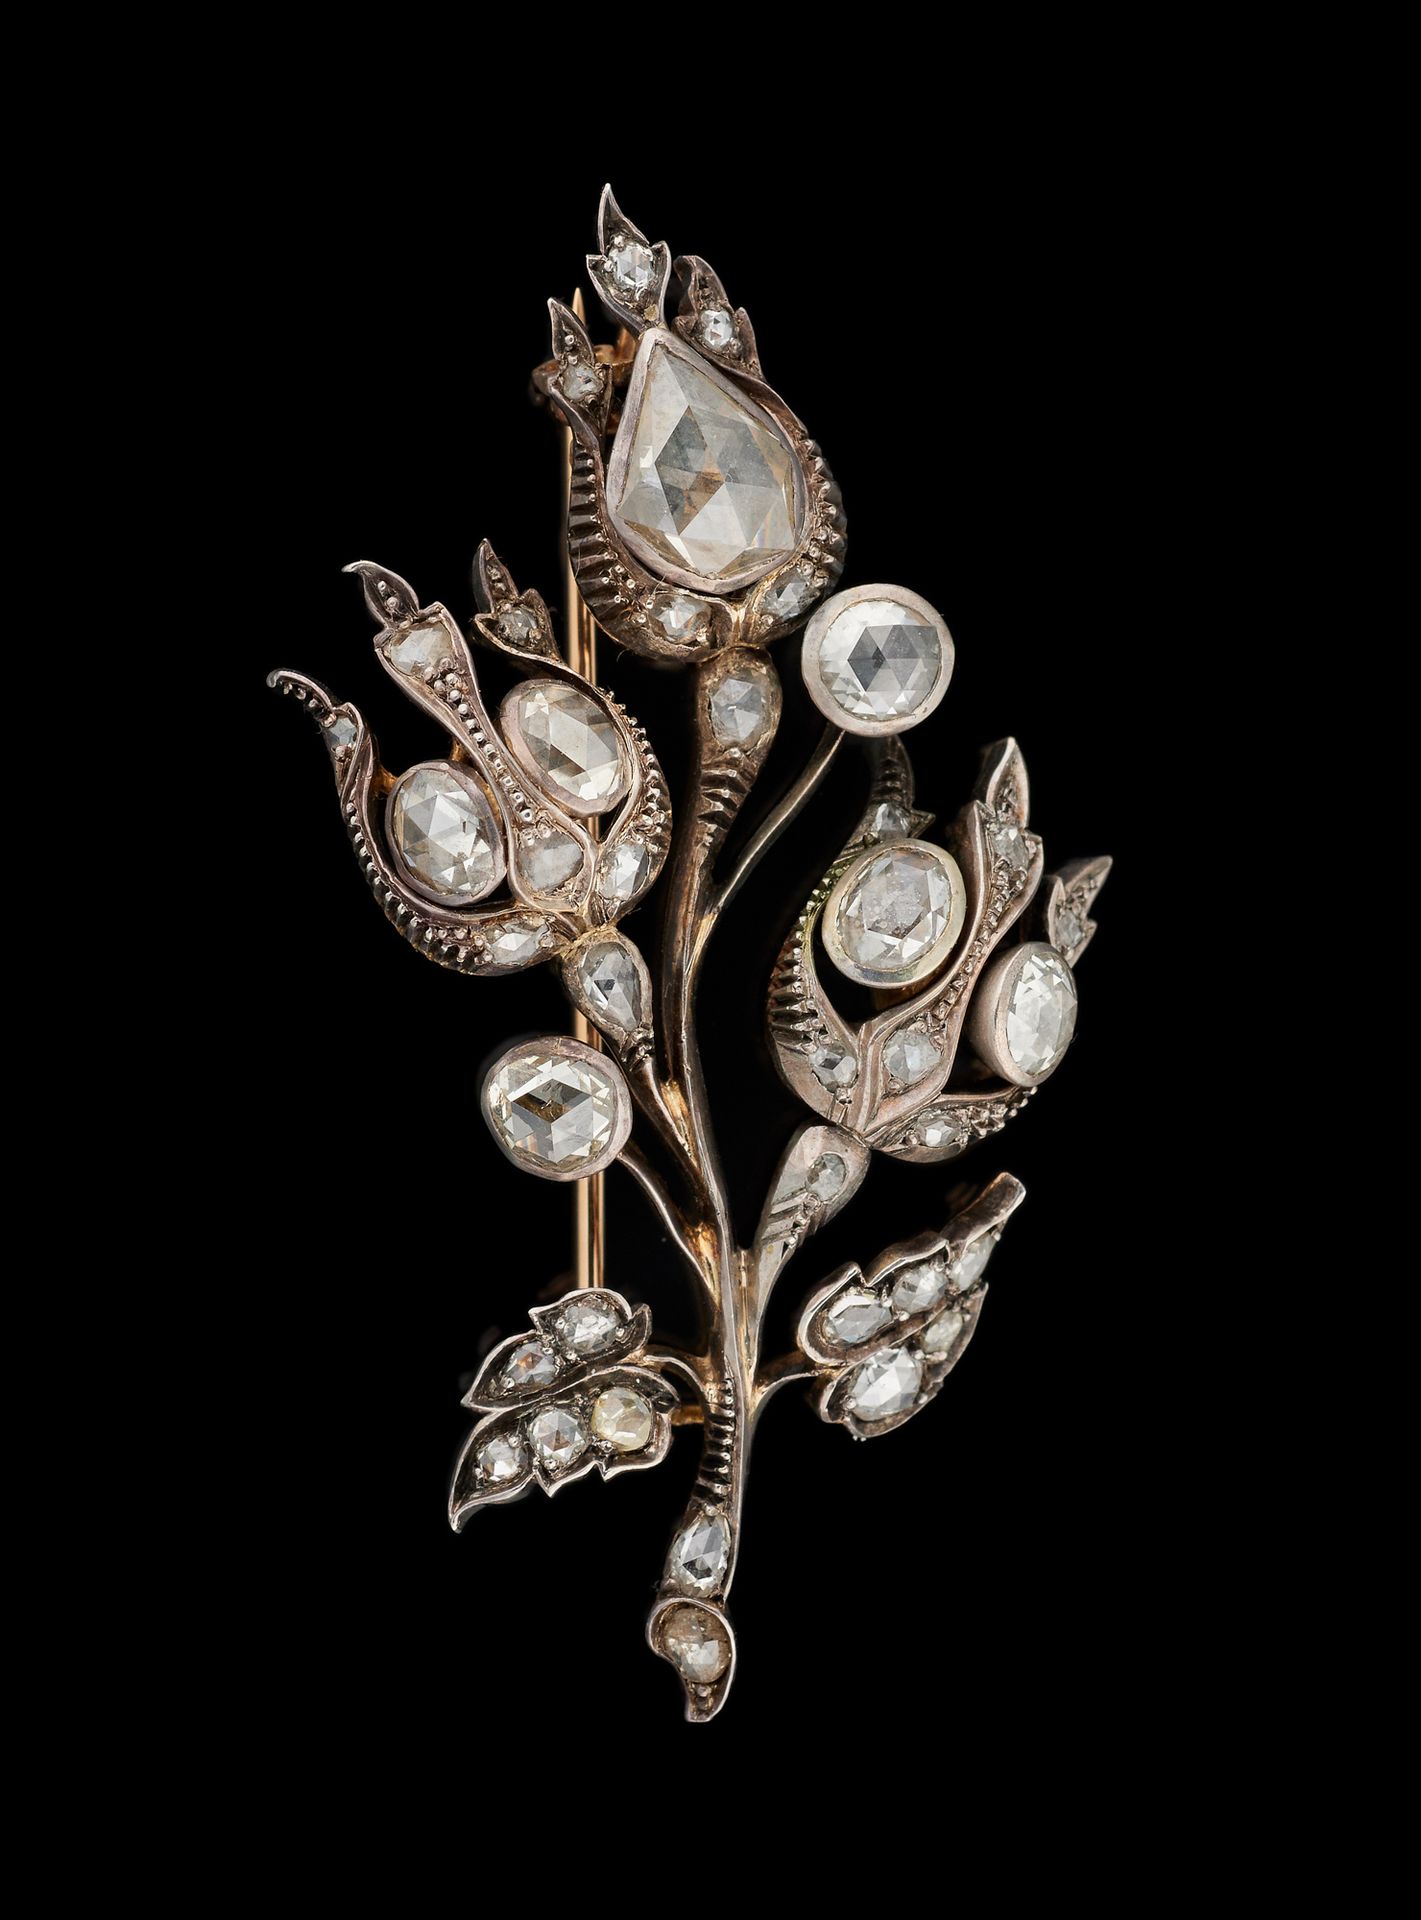 Travail fin 19e. Jewel: Silver brooch on gold with rose cut diamonds.

Size: 3,2&hellip;